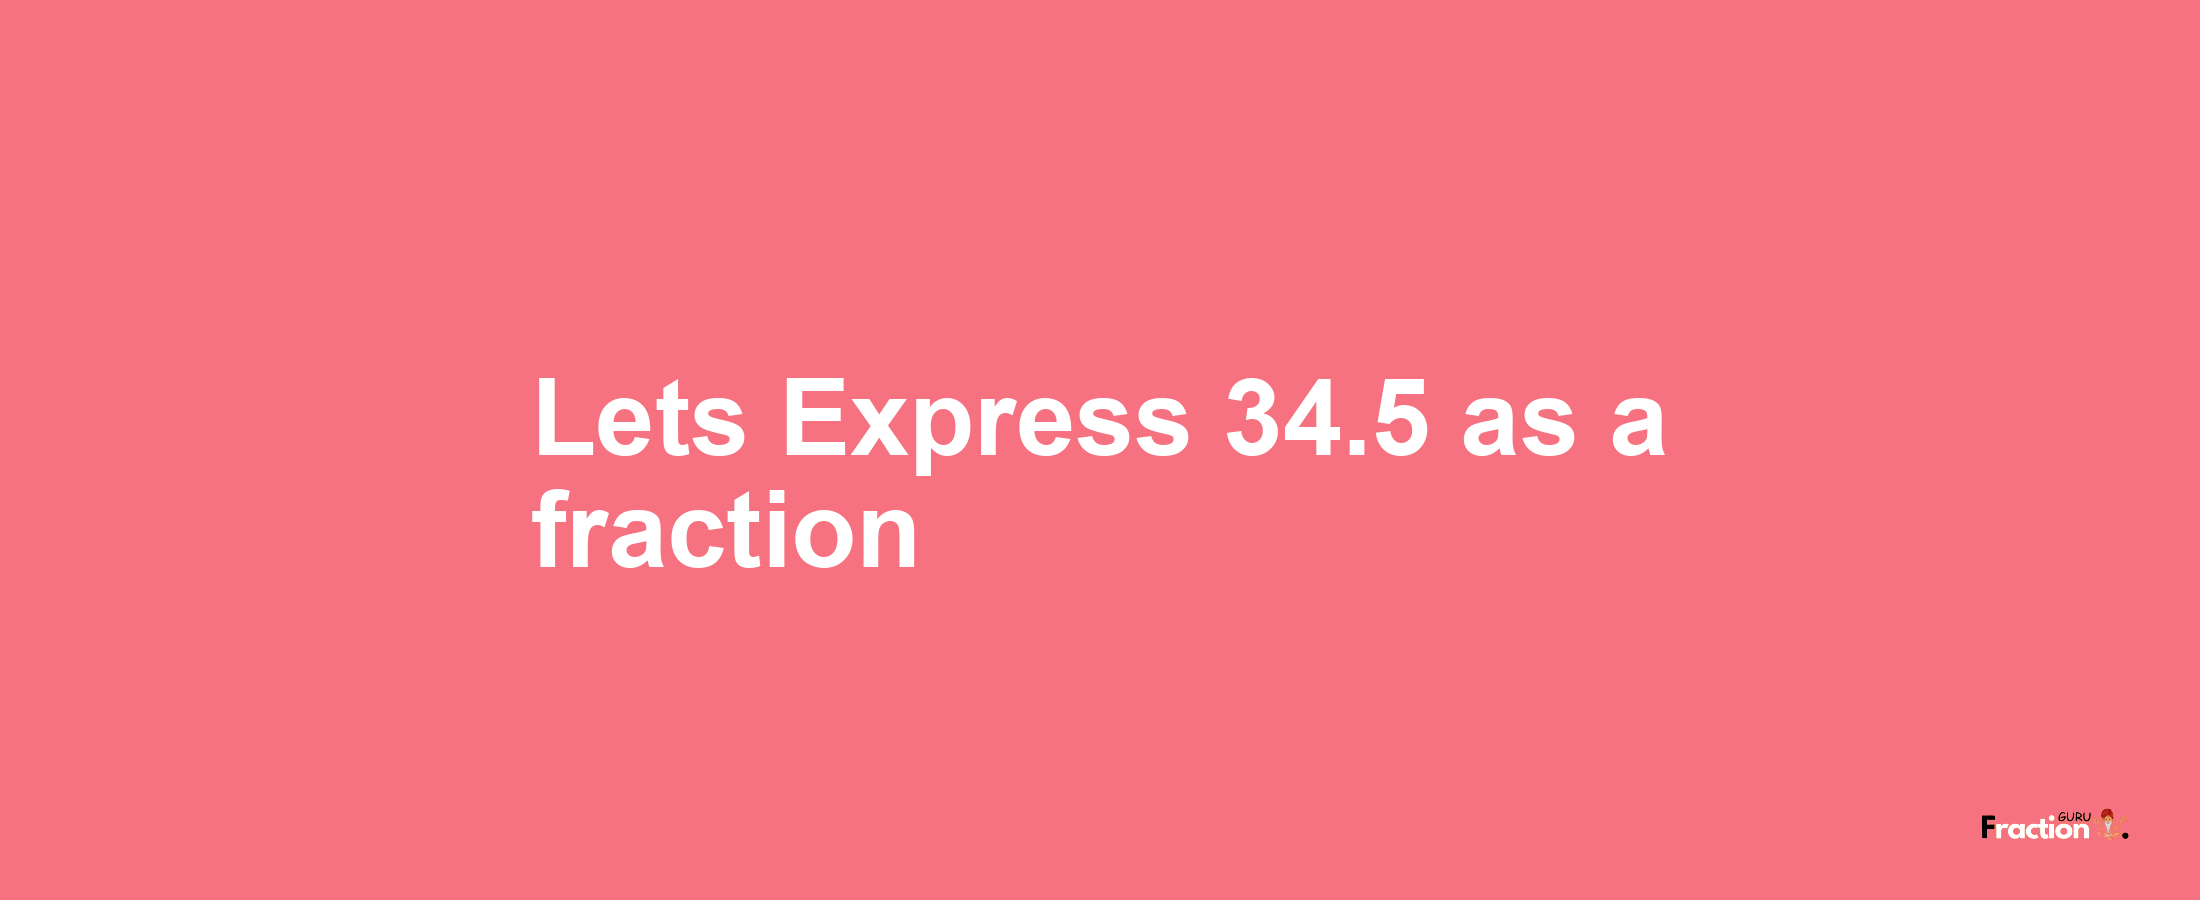 Lets Express 34.5 as afraction